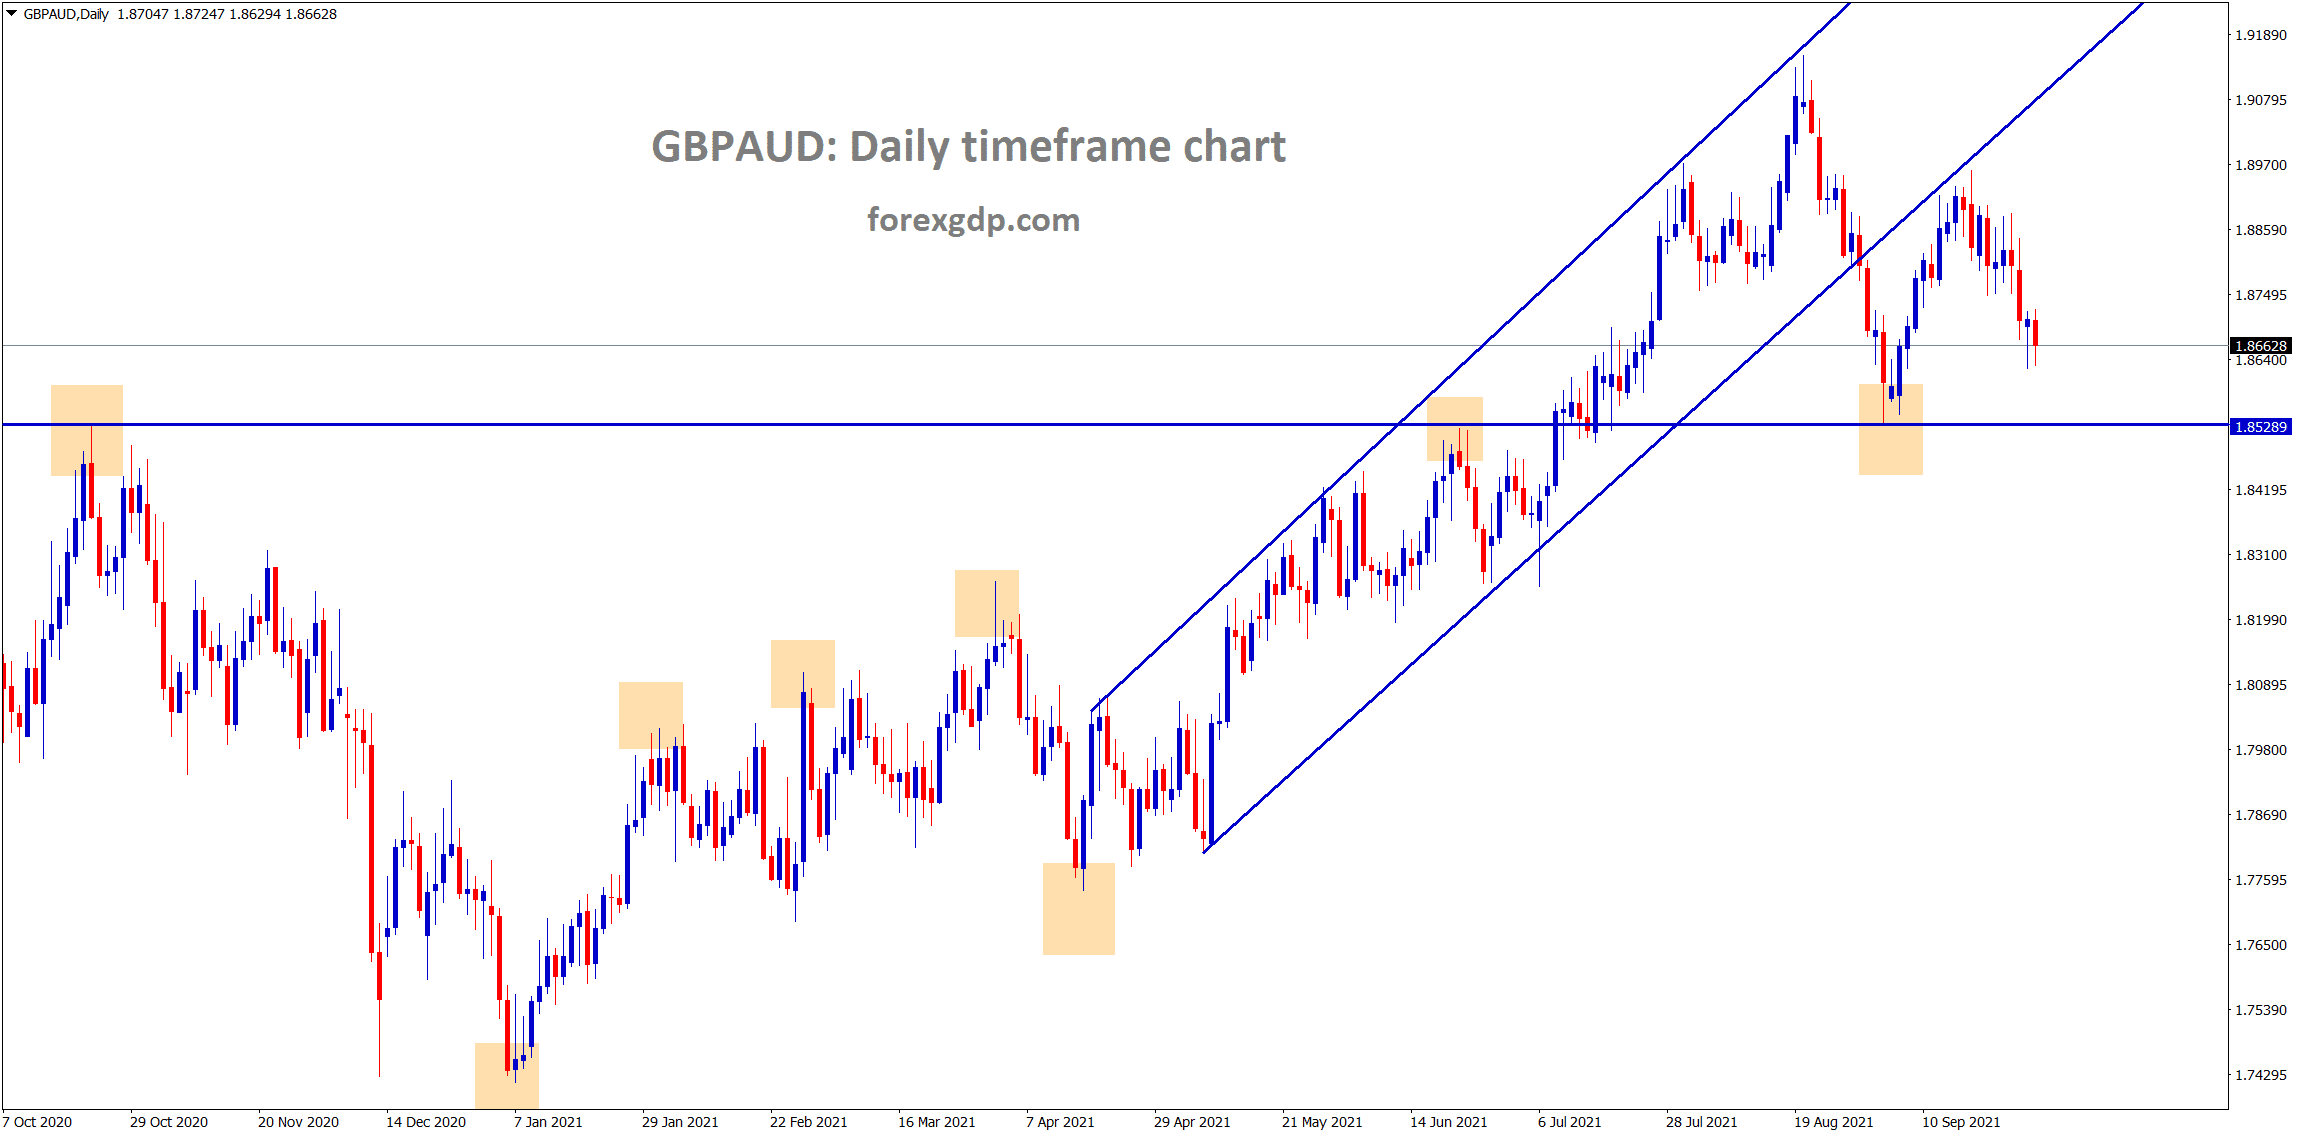 GBPAUD is making correction after retesting the broken level of the ascending channel